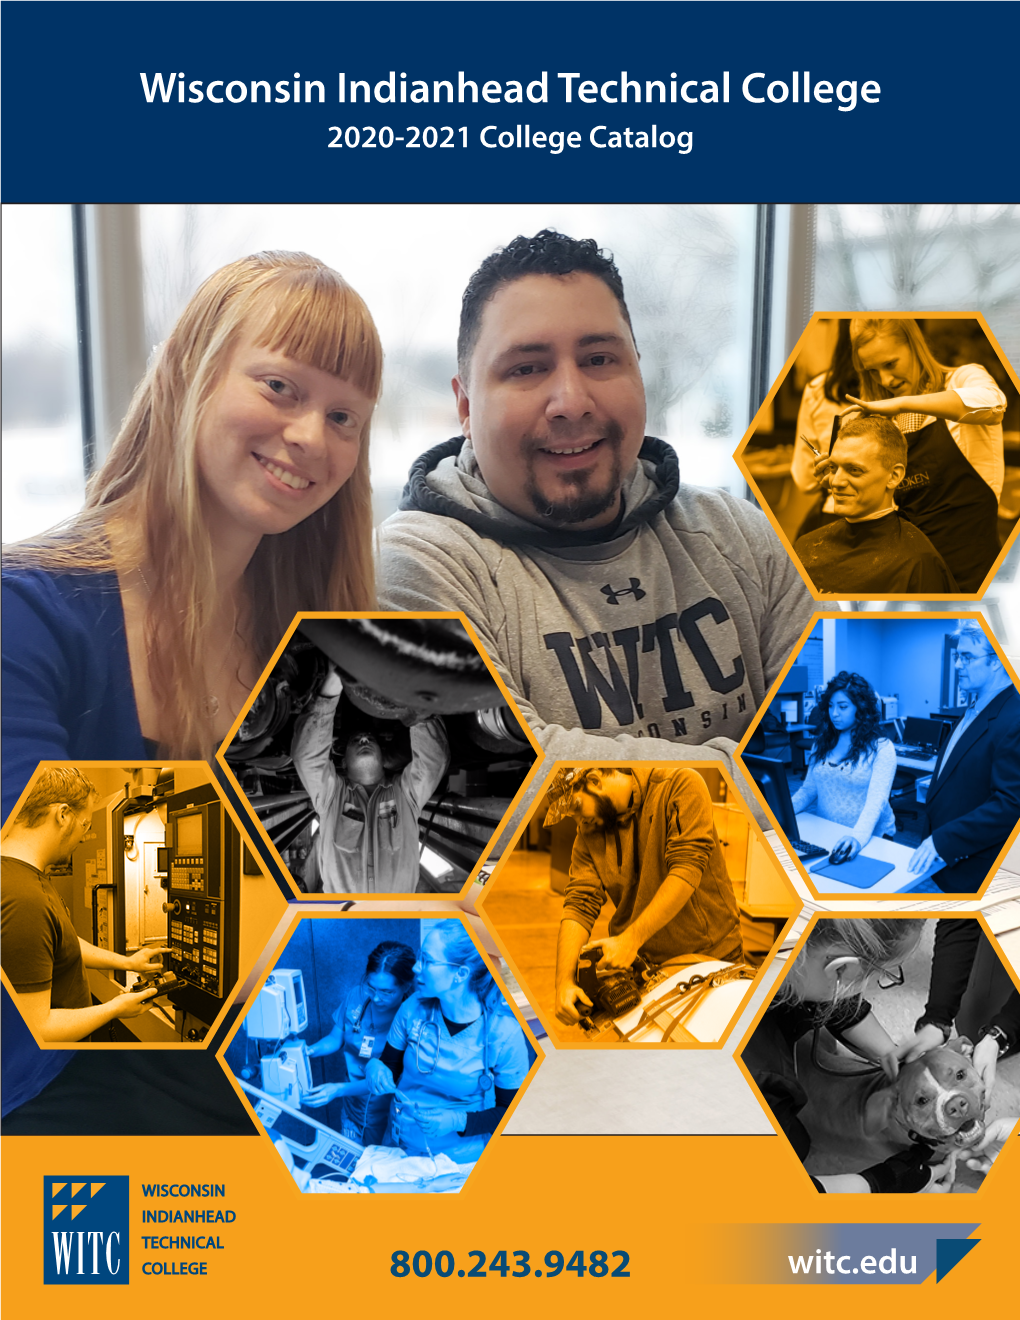 Wisconsin Indianhead Technical College 2020-2021 College Catalog